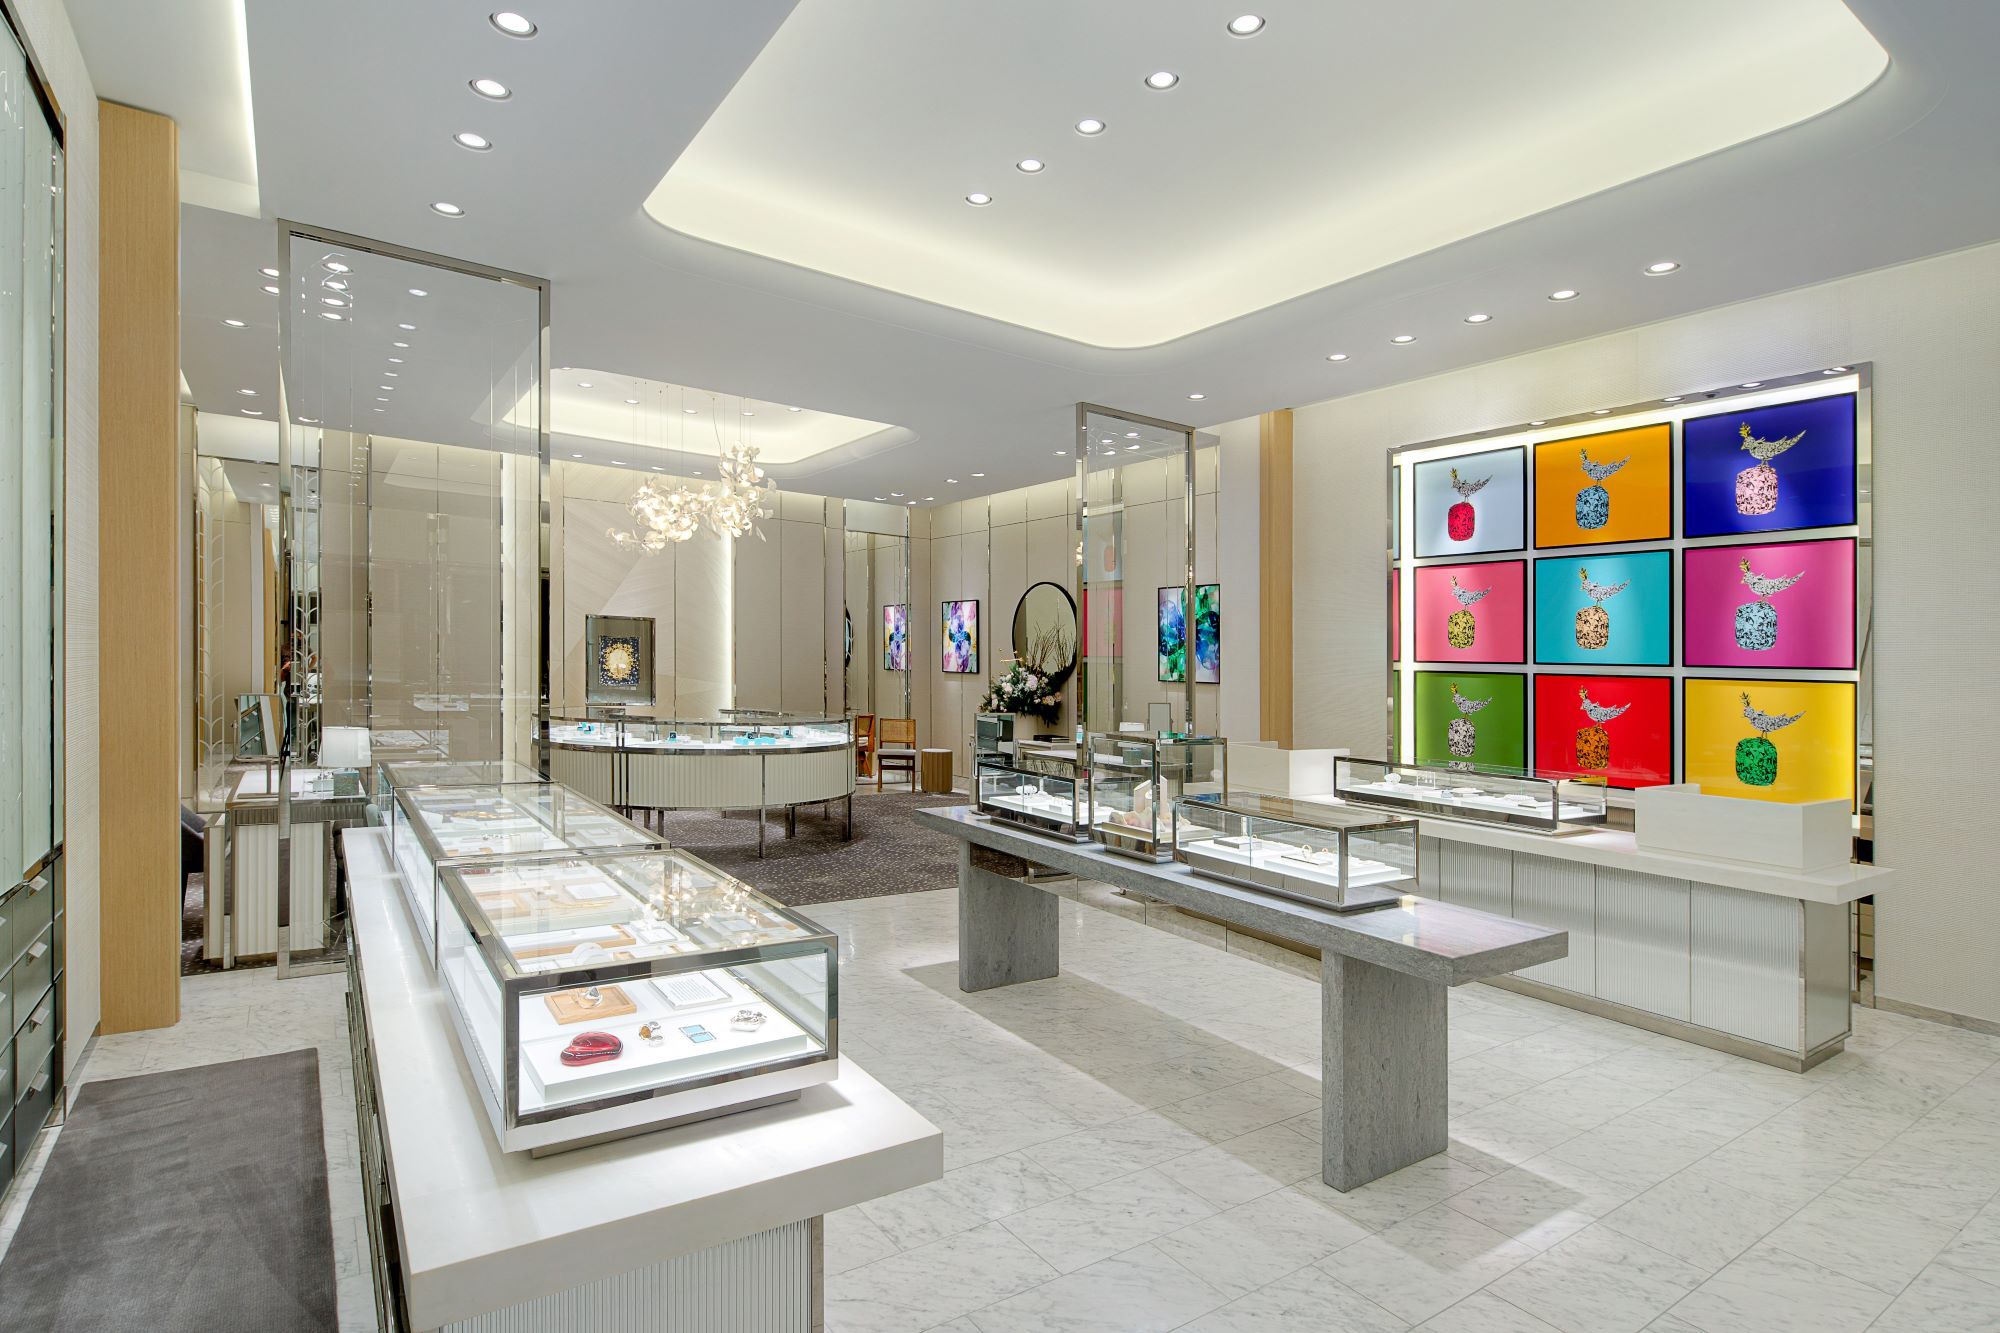 Inside the iconic Tiffany & Co Jewelry Store in New York City